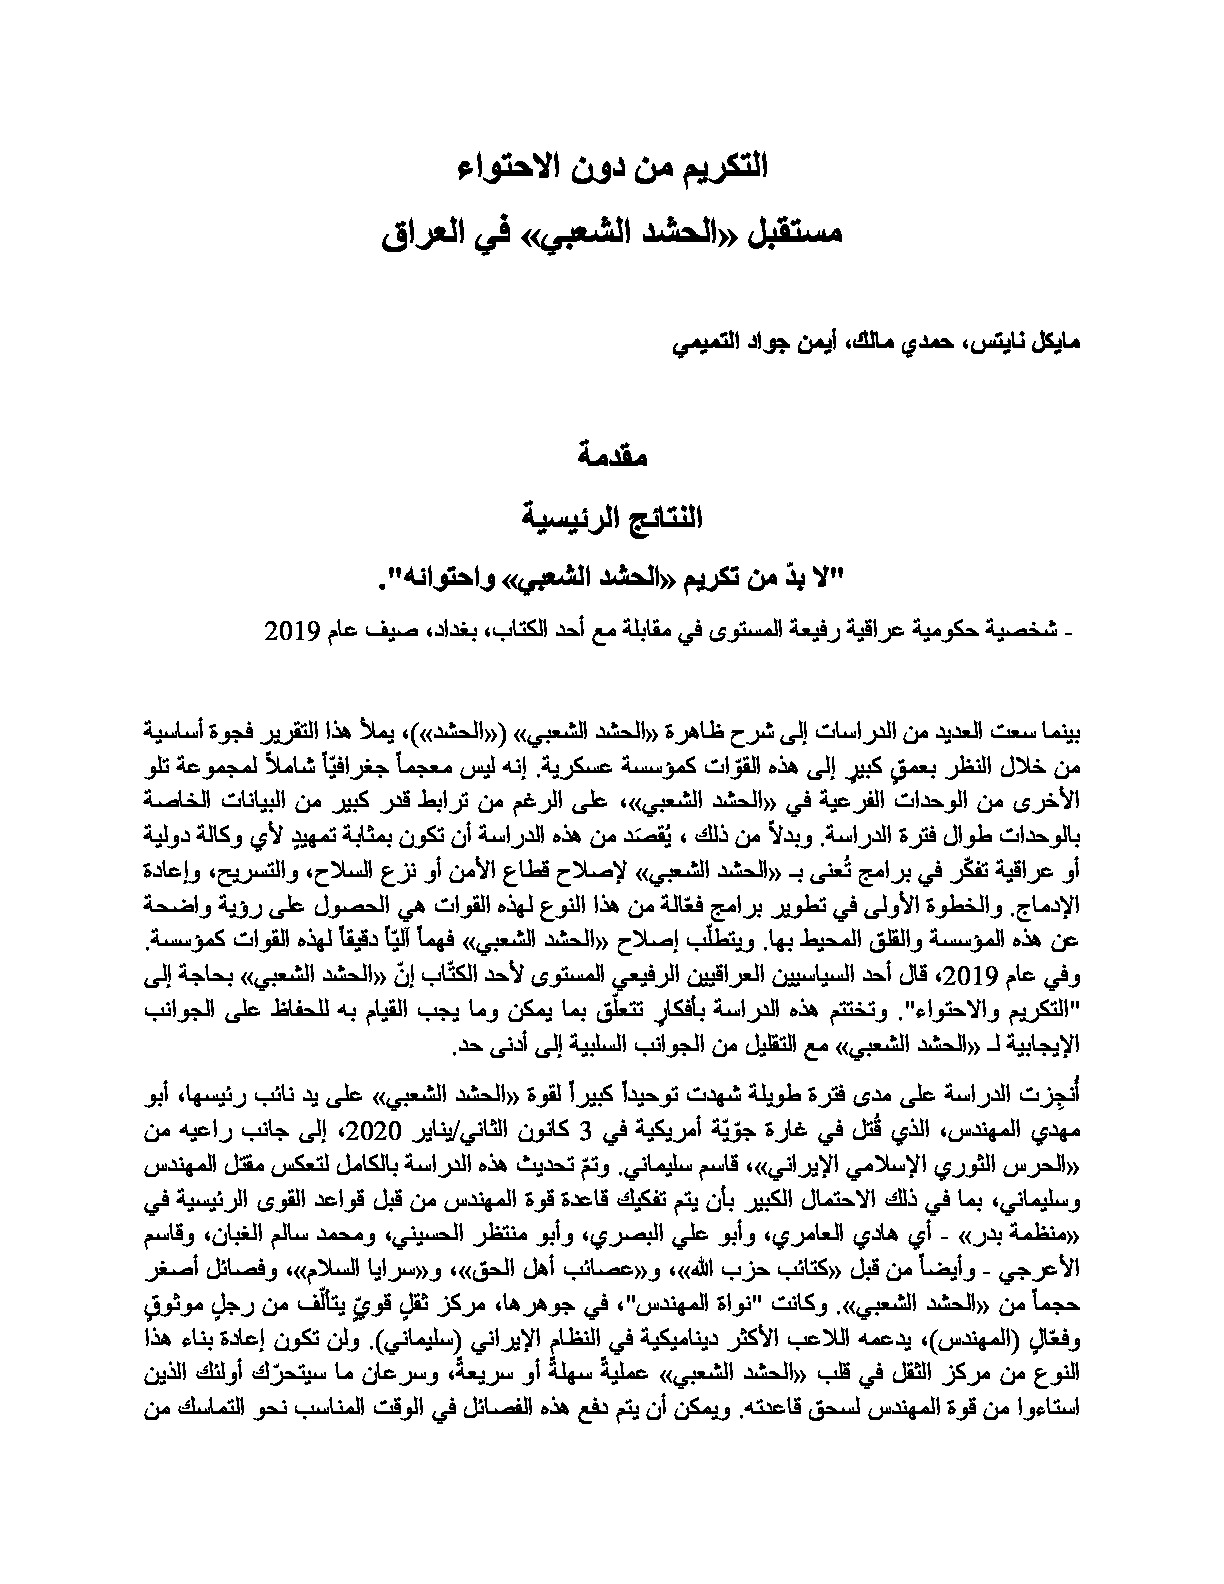 SSR_-_HONORED,_NOT_CONTAINED-THE_FUTURE_OF_IRAQ’S_PMF-SECURITY_SECTOR_REFORM.pdf